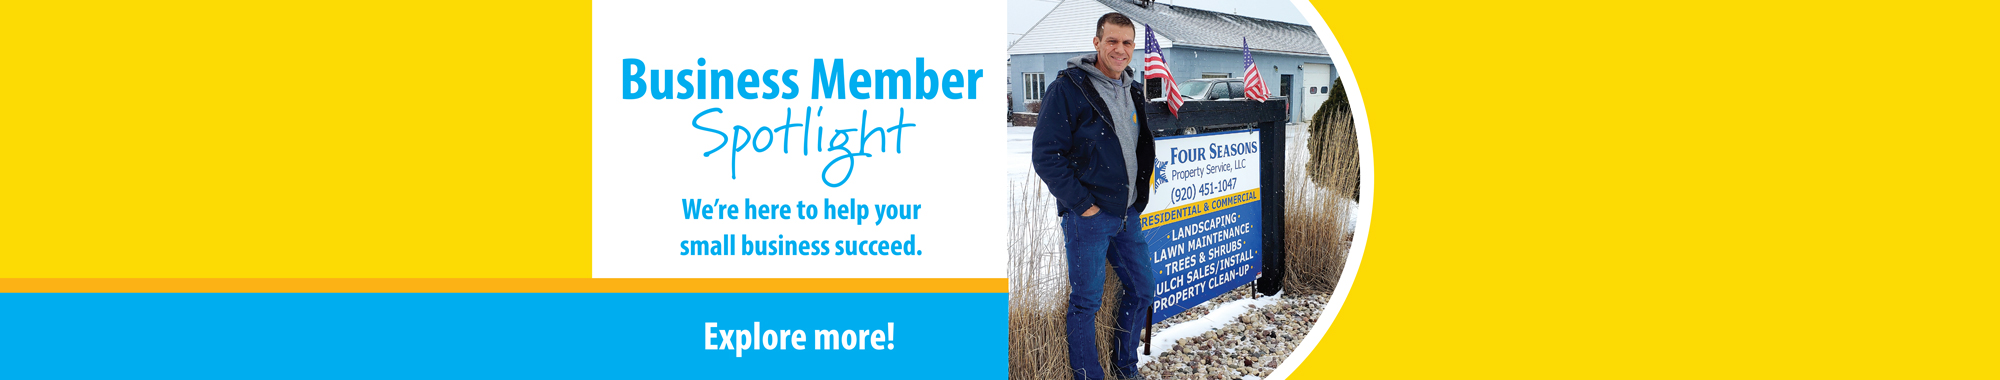 Business Member Spotlight - We're here to help your small business succeed. Explore more!